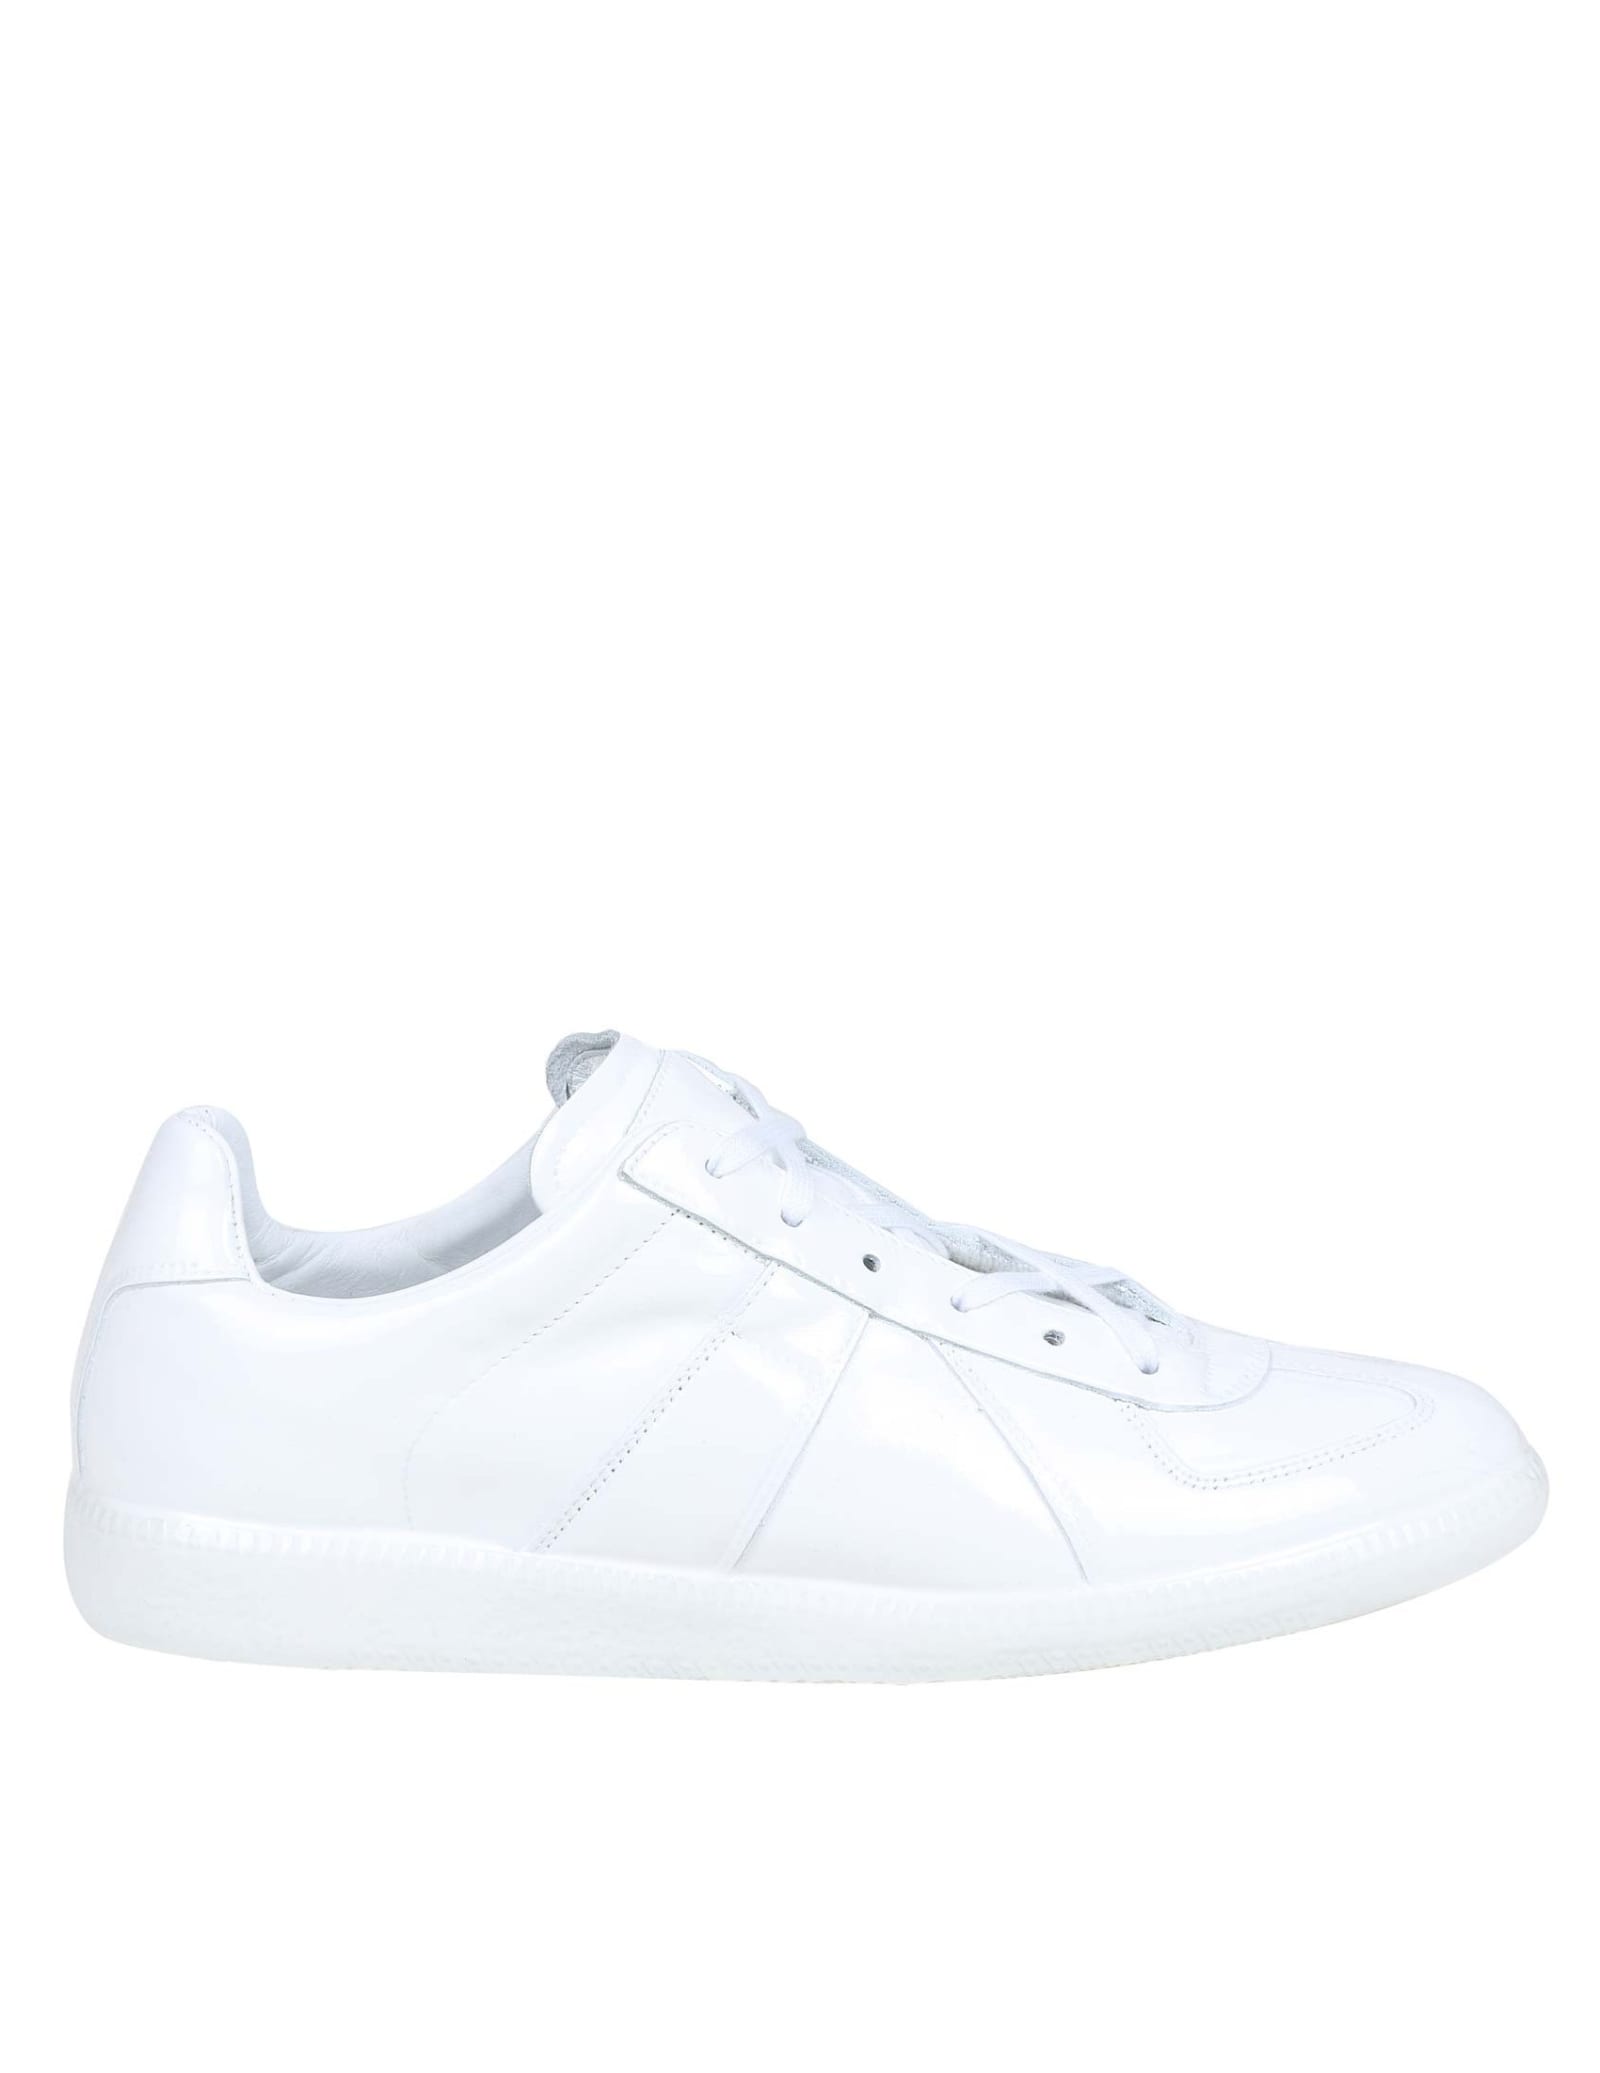 Sneakers Replica In White Paint